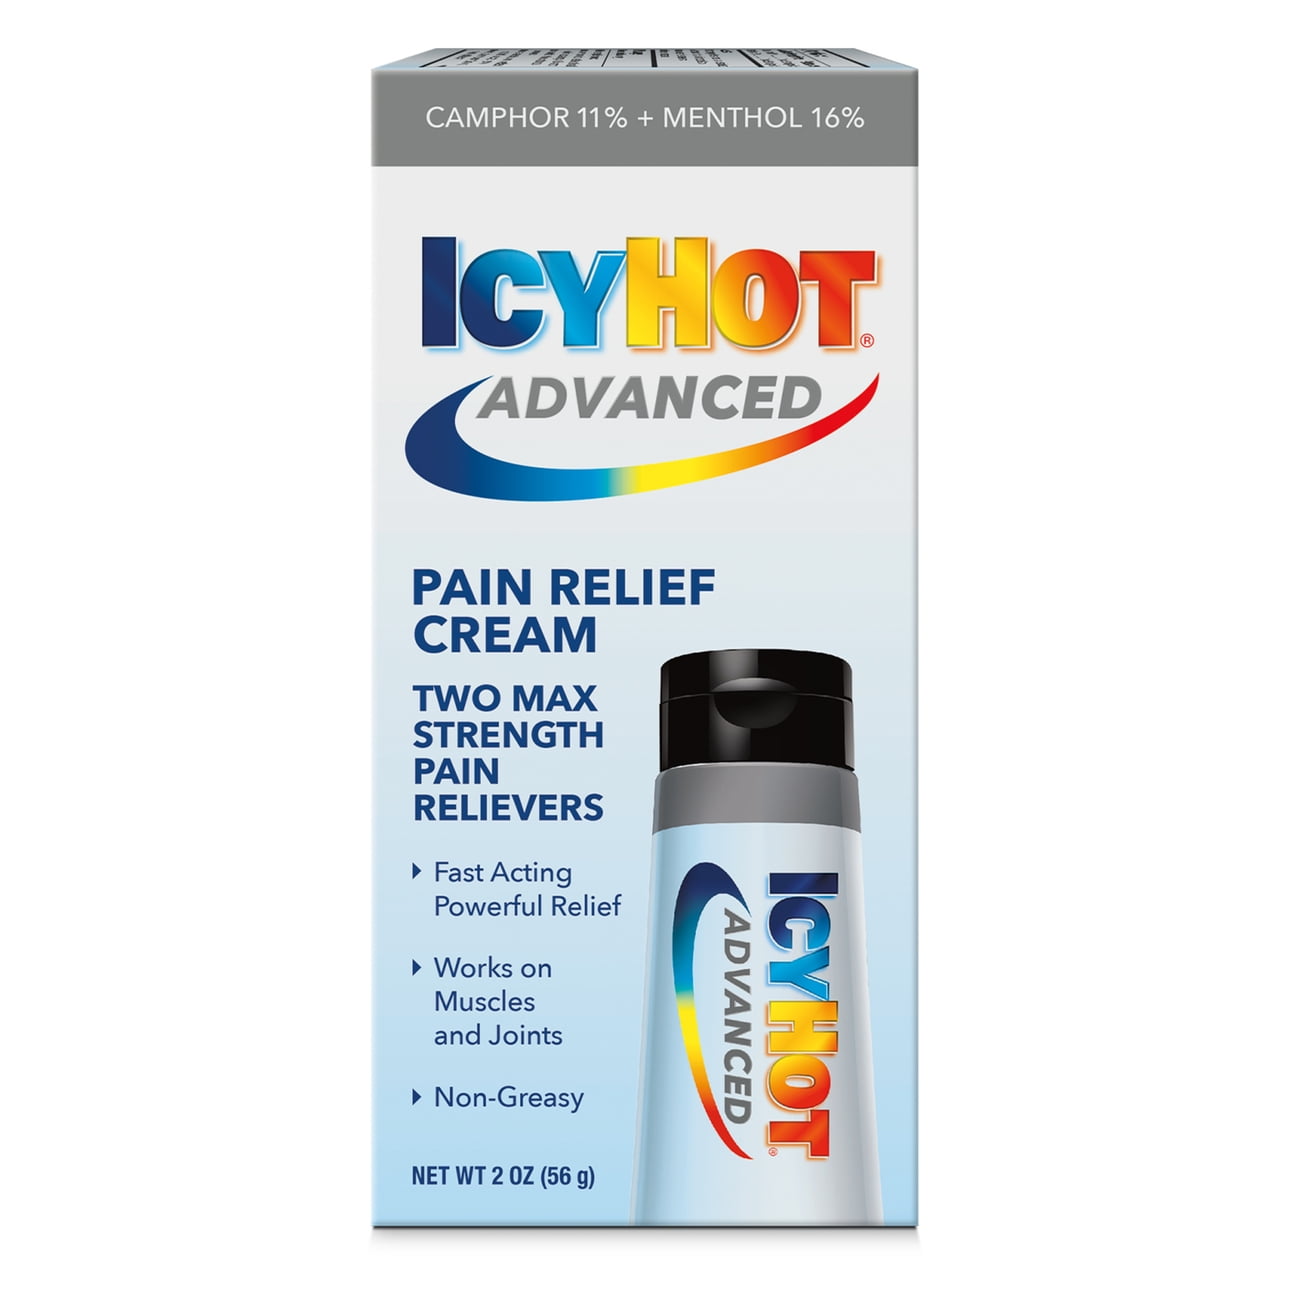 ayan surya recommends Icy Hot On Vag